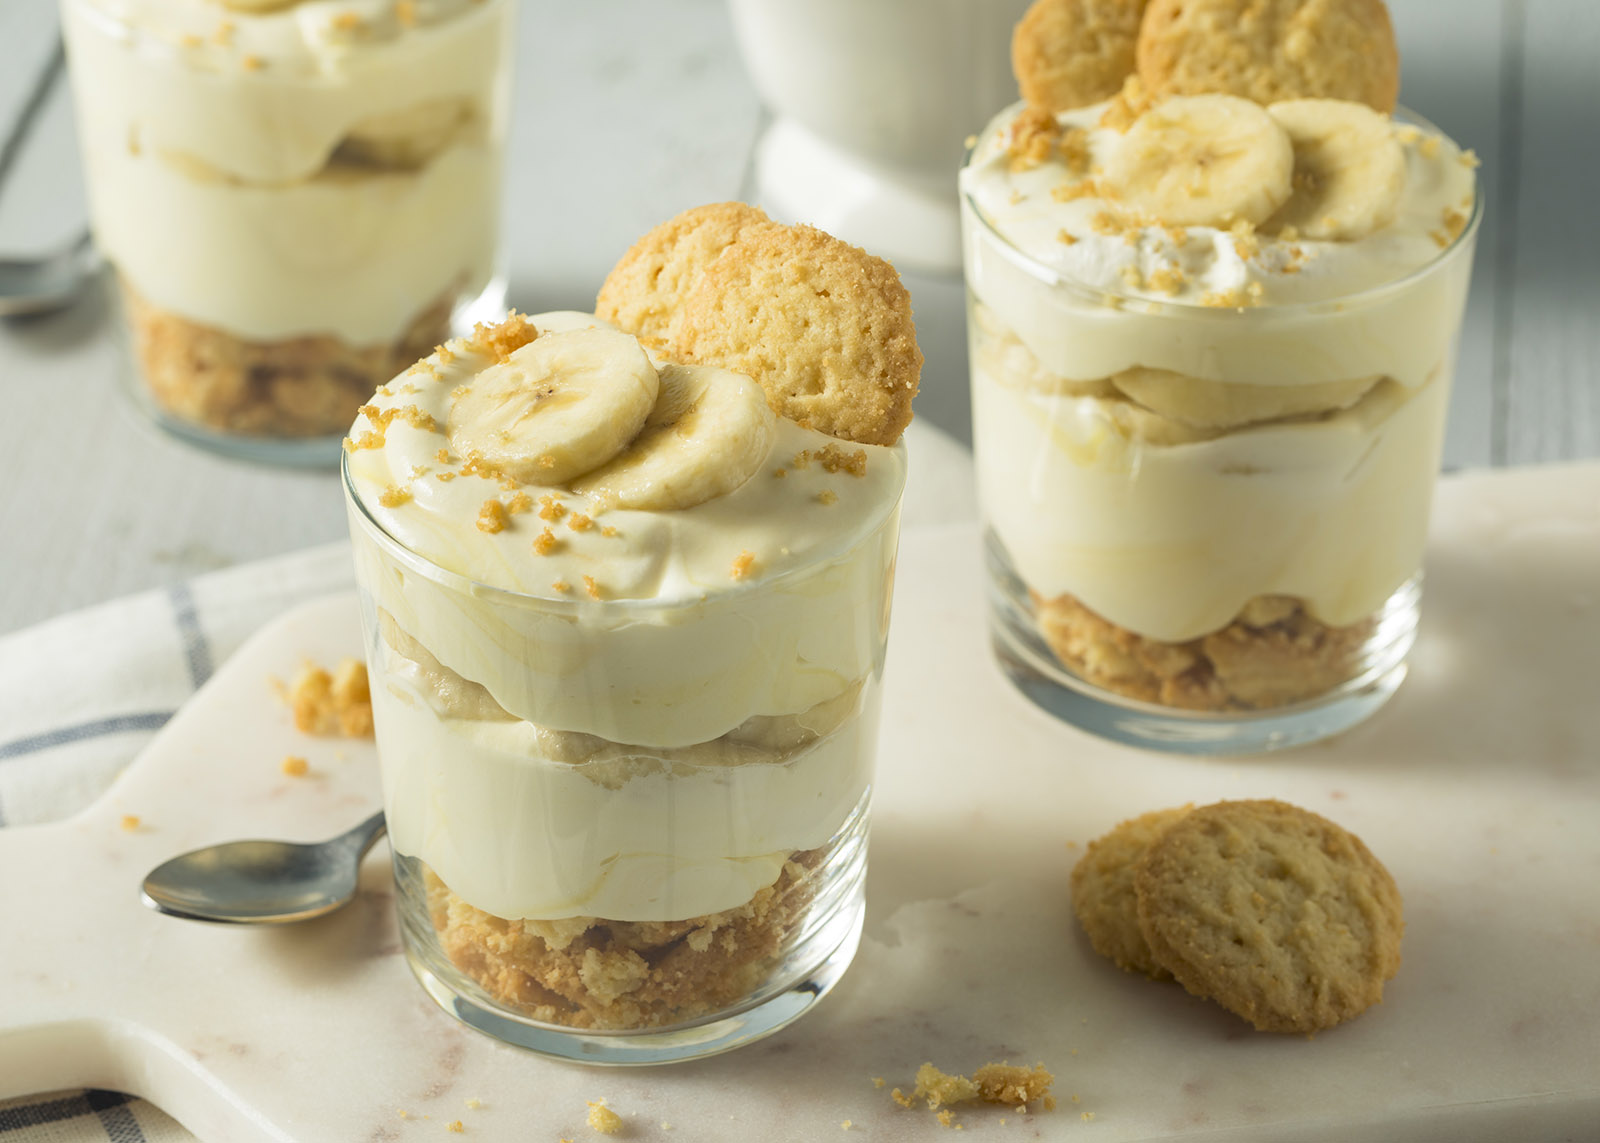 glass bowls of banana pudding sitting on a wooden table